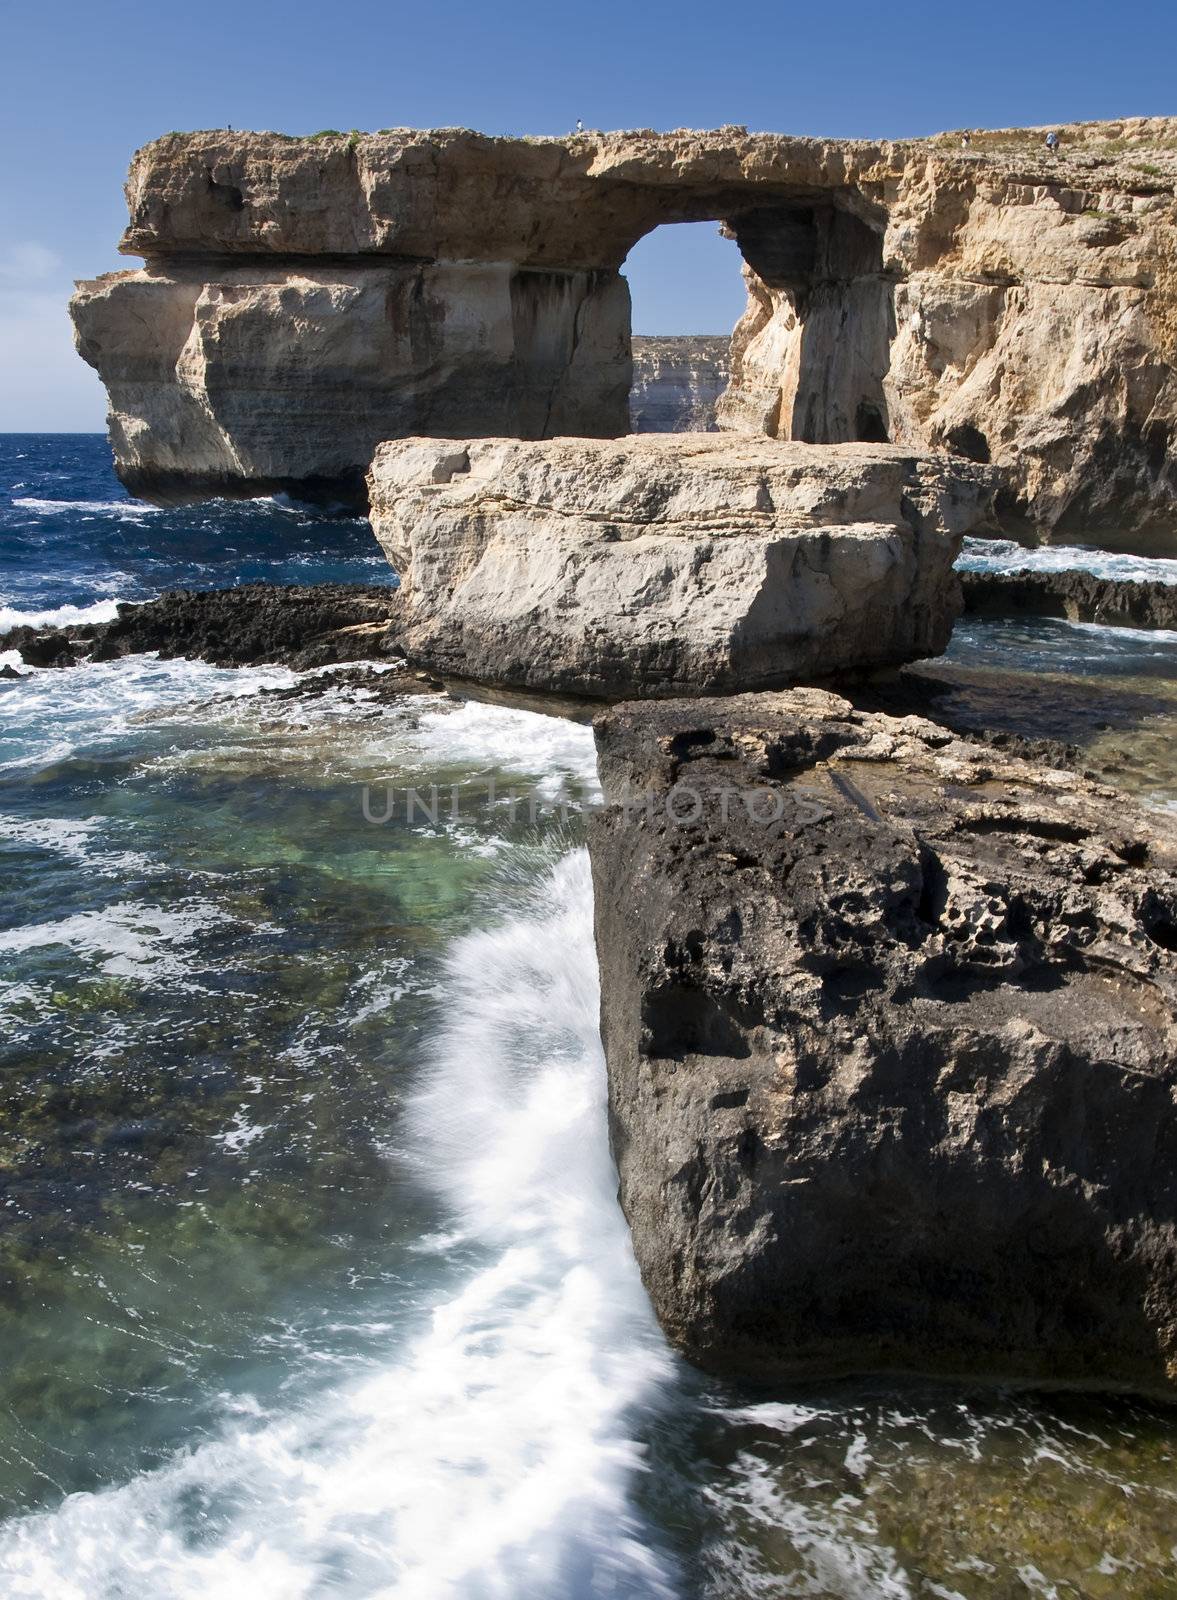 The Azure Window and Blue Hole by PhotoWorks